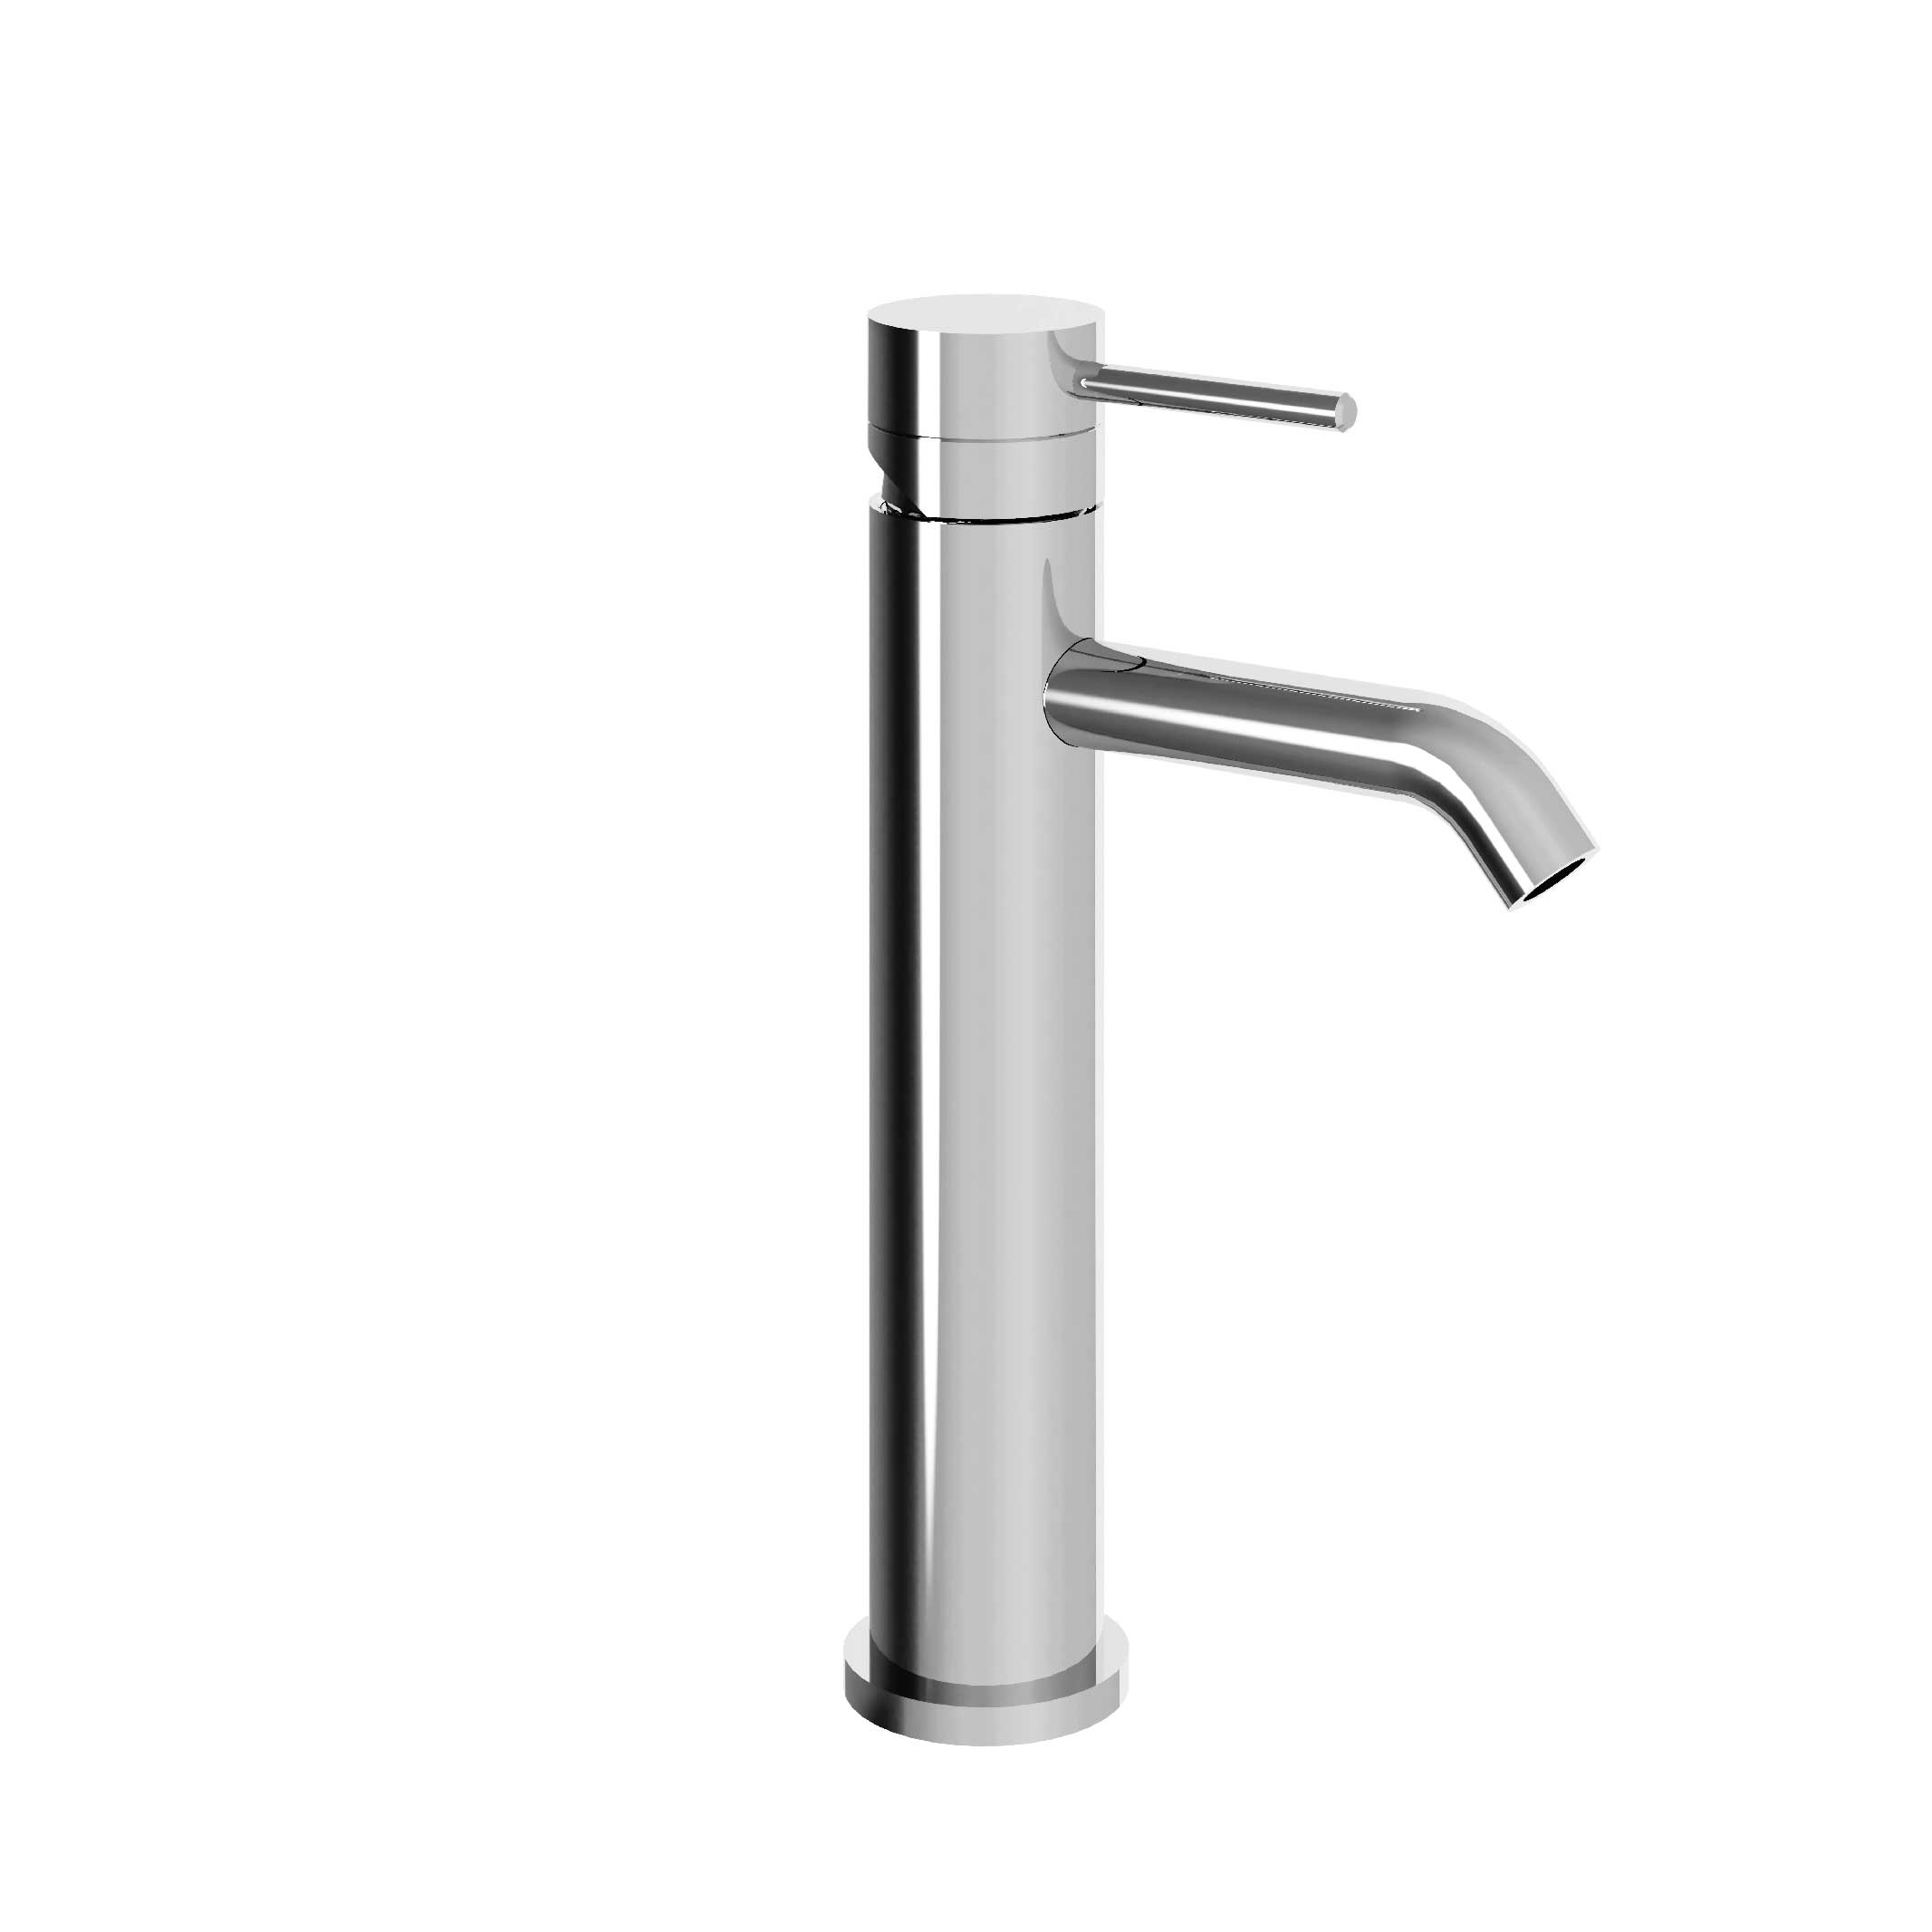 M91-1101MB Heightened lever basin mixer, H. 313mm